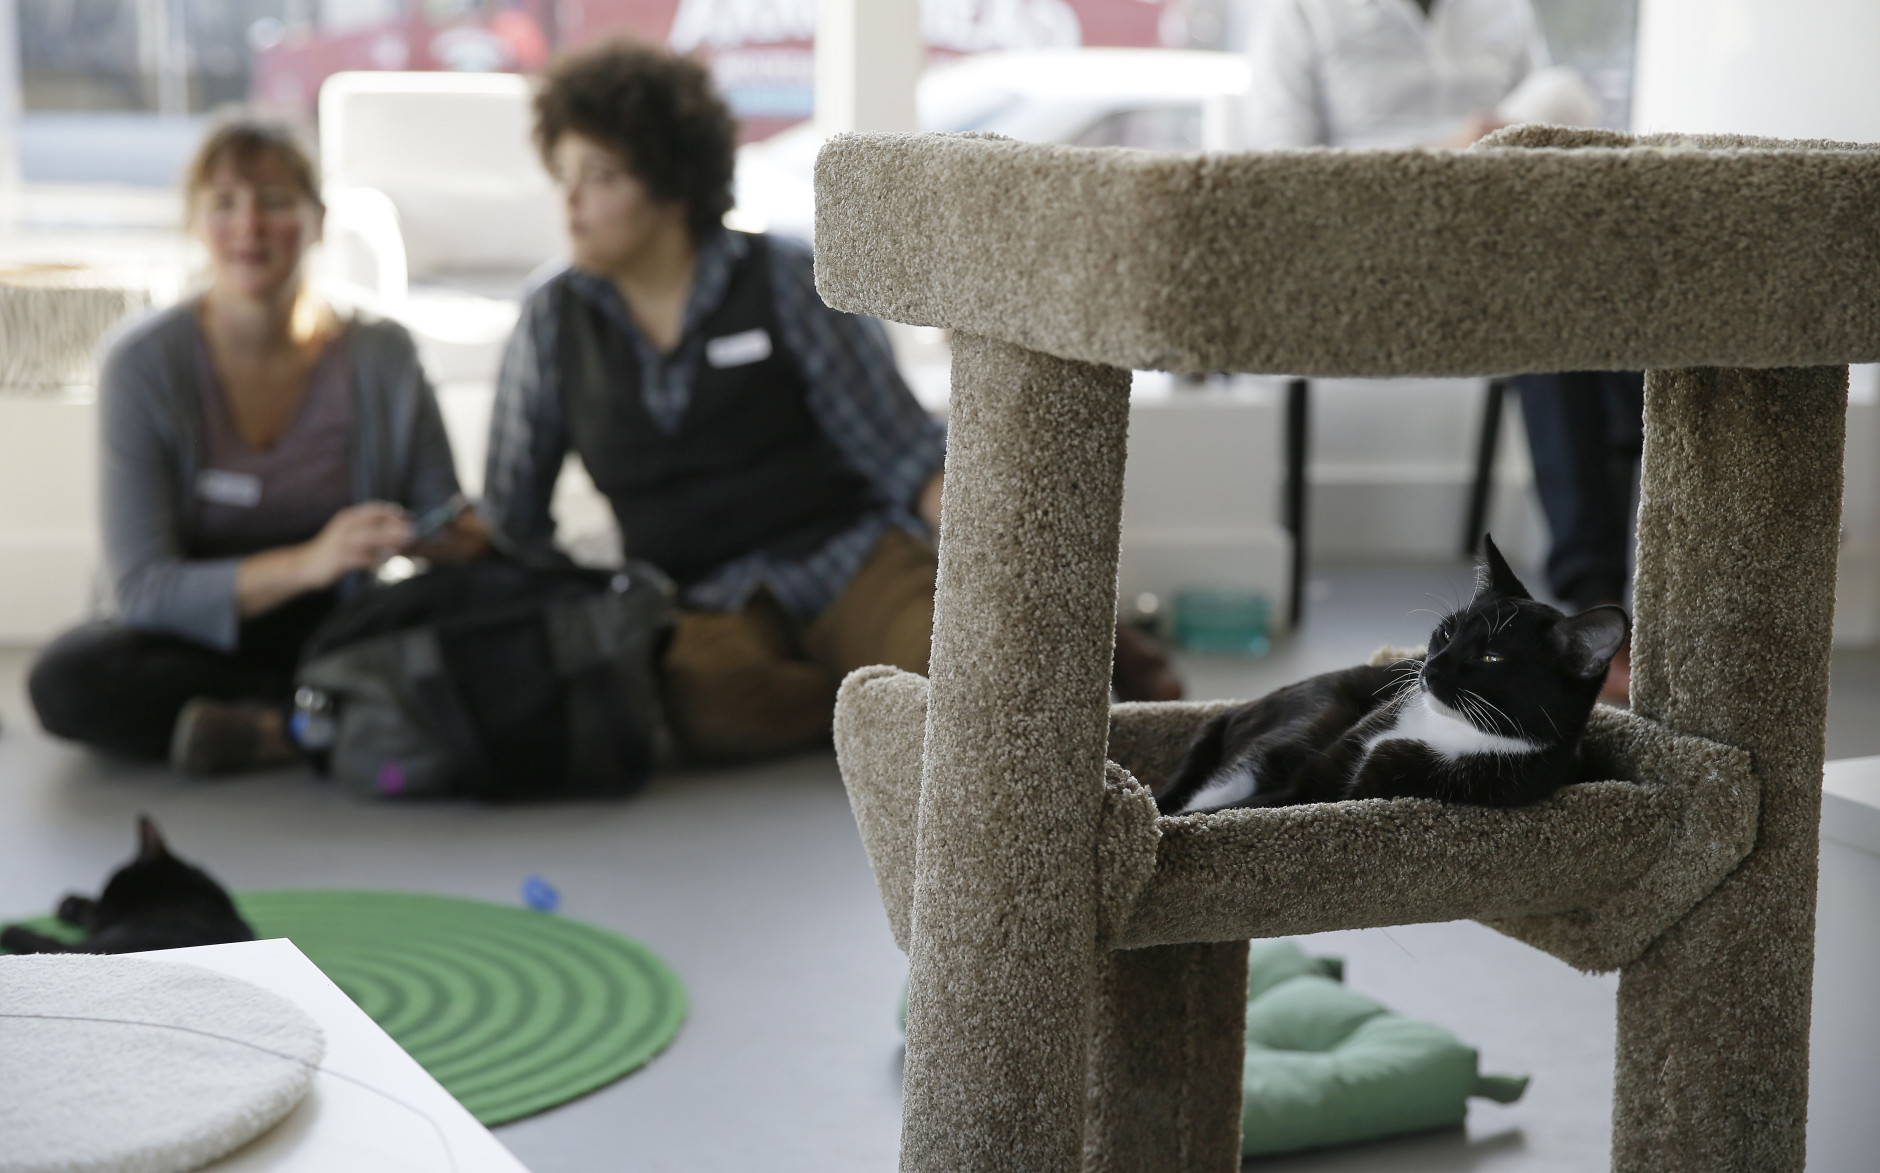 In this photo taken Thursday, Nov. 6, 2014, a cat sits in a tower and watches visitors to the Cat Town Cafe in Oakland, Calif. Following similar cafe concepts in Asia &amp; Europe, the cafe has become America's first permanent feline-friendly coffee shop. Cafe customers pay to pet cute kitties while sipping on tea or expresso drinks. It allows customers, who may not be able to have cats in their own homes, to enjoy the benefits of furry friends for short times without the responsibility. The animals come from a partnership with a local animal shelter and are also available for adoption. (AP Photo/Eric Risberg)